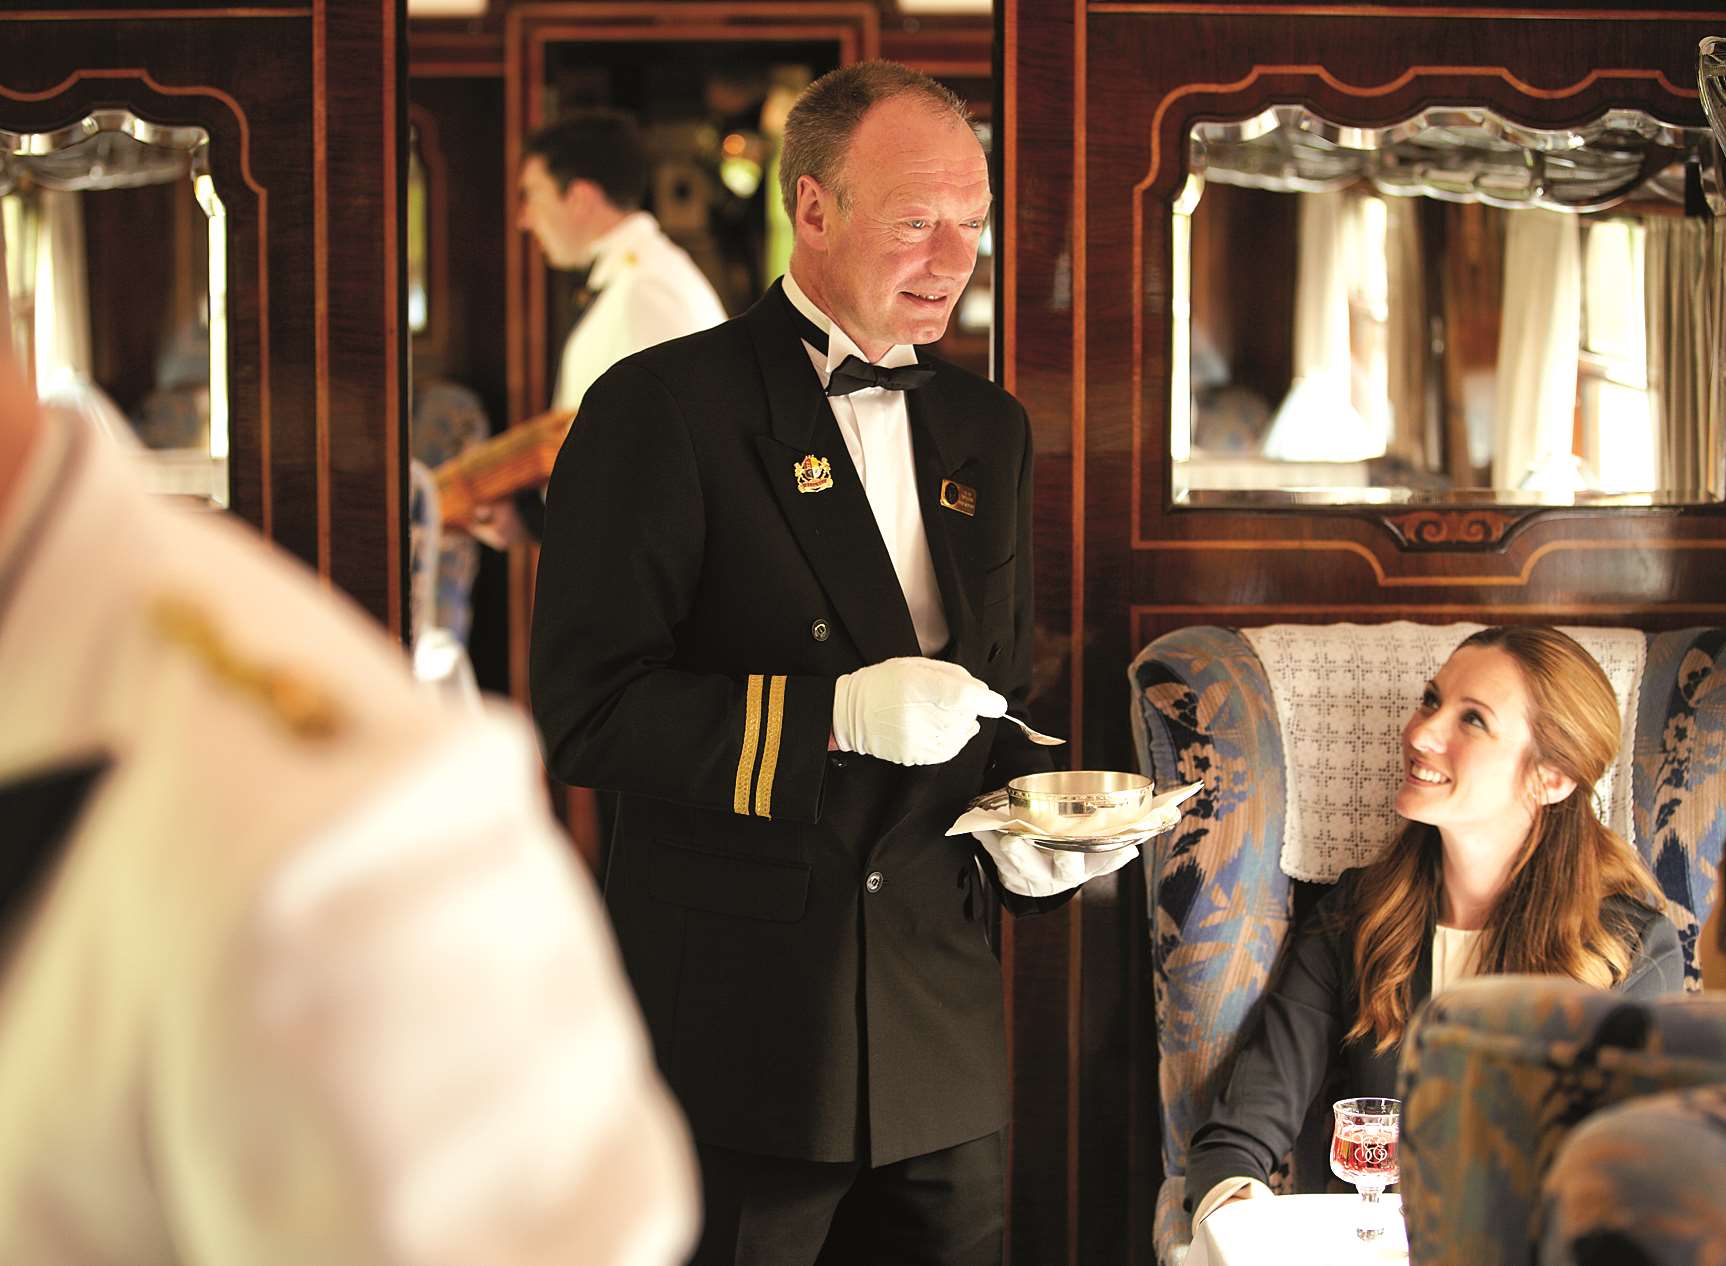 Take a trip of a lifetime on the British Belmond Pullman, while raising money for charity